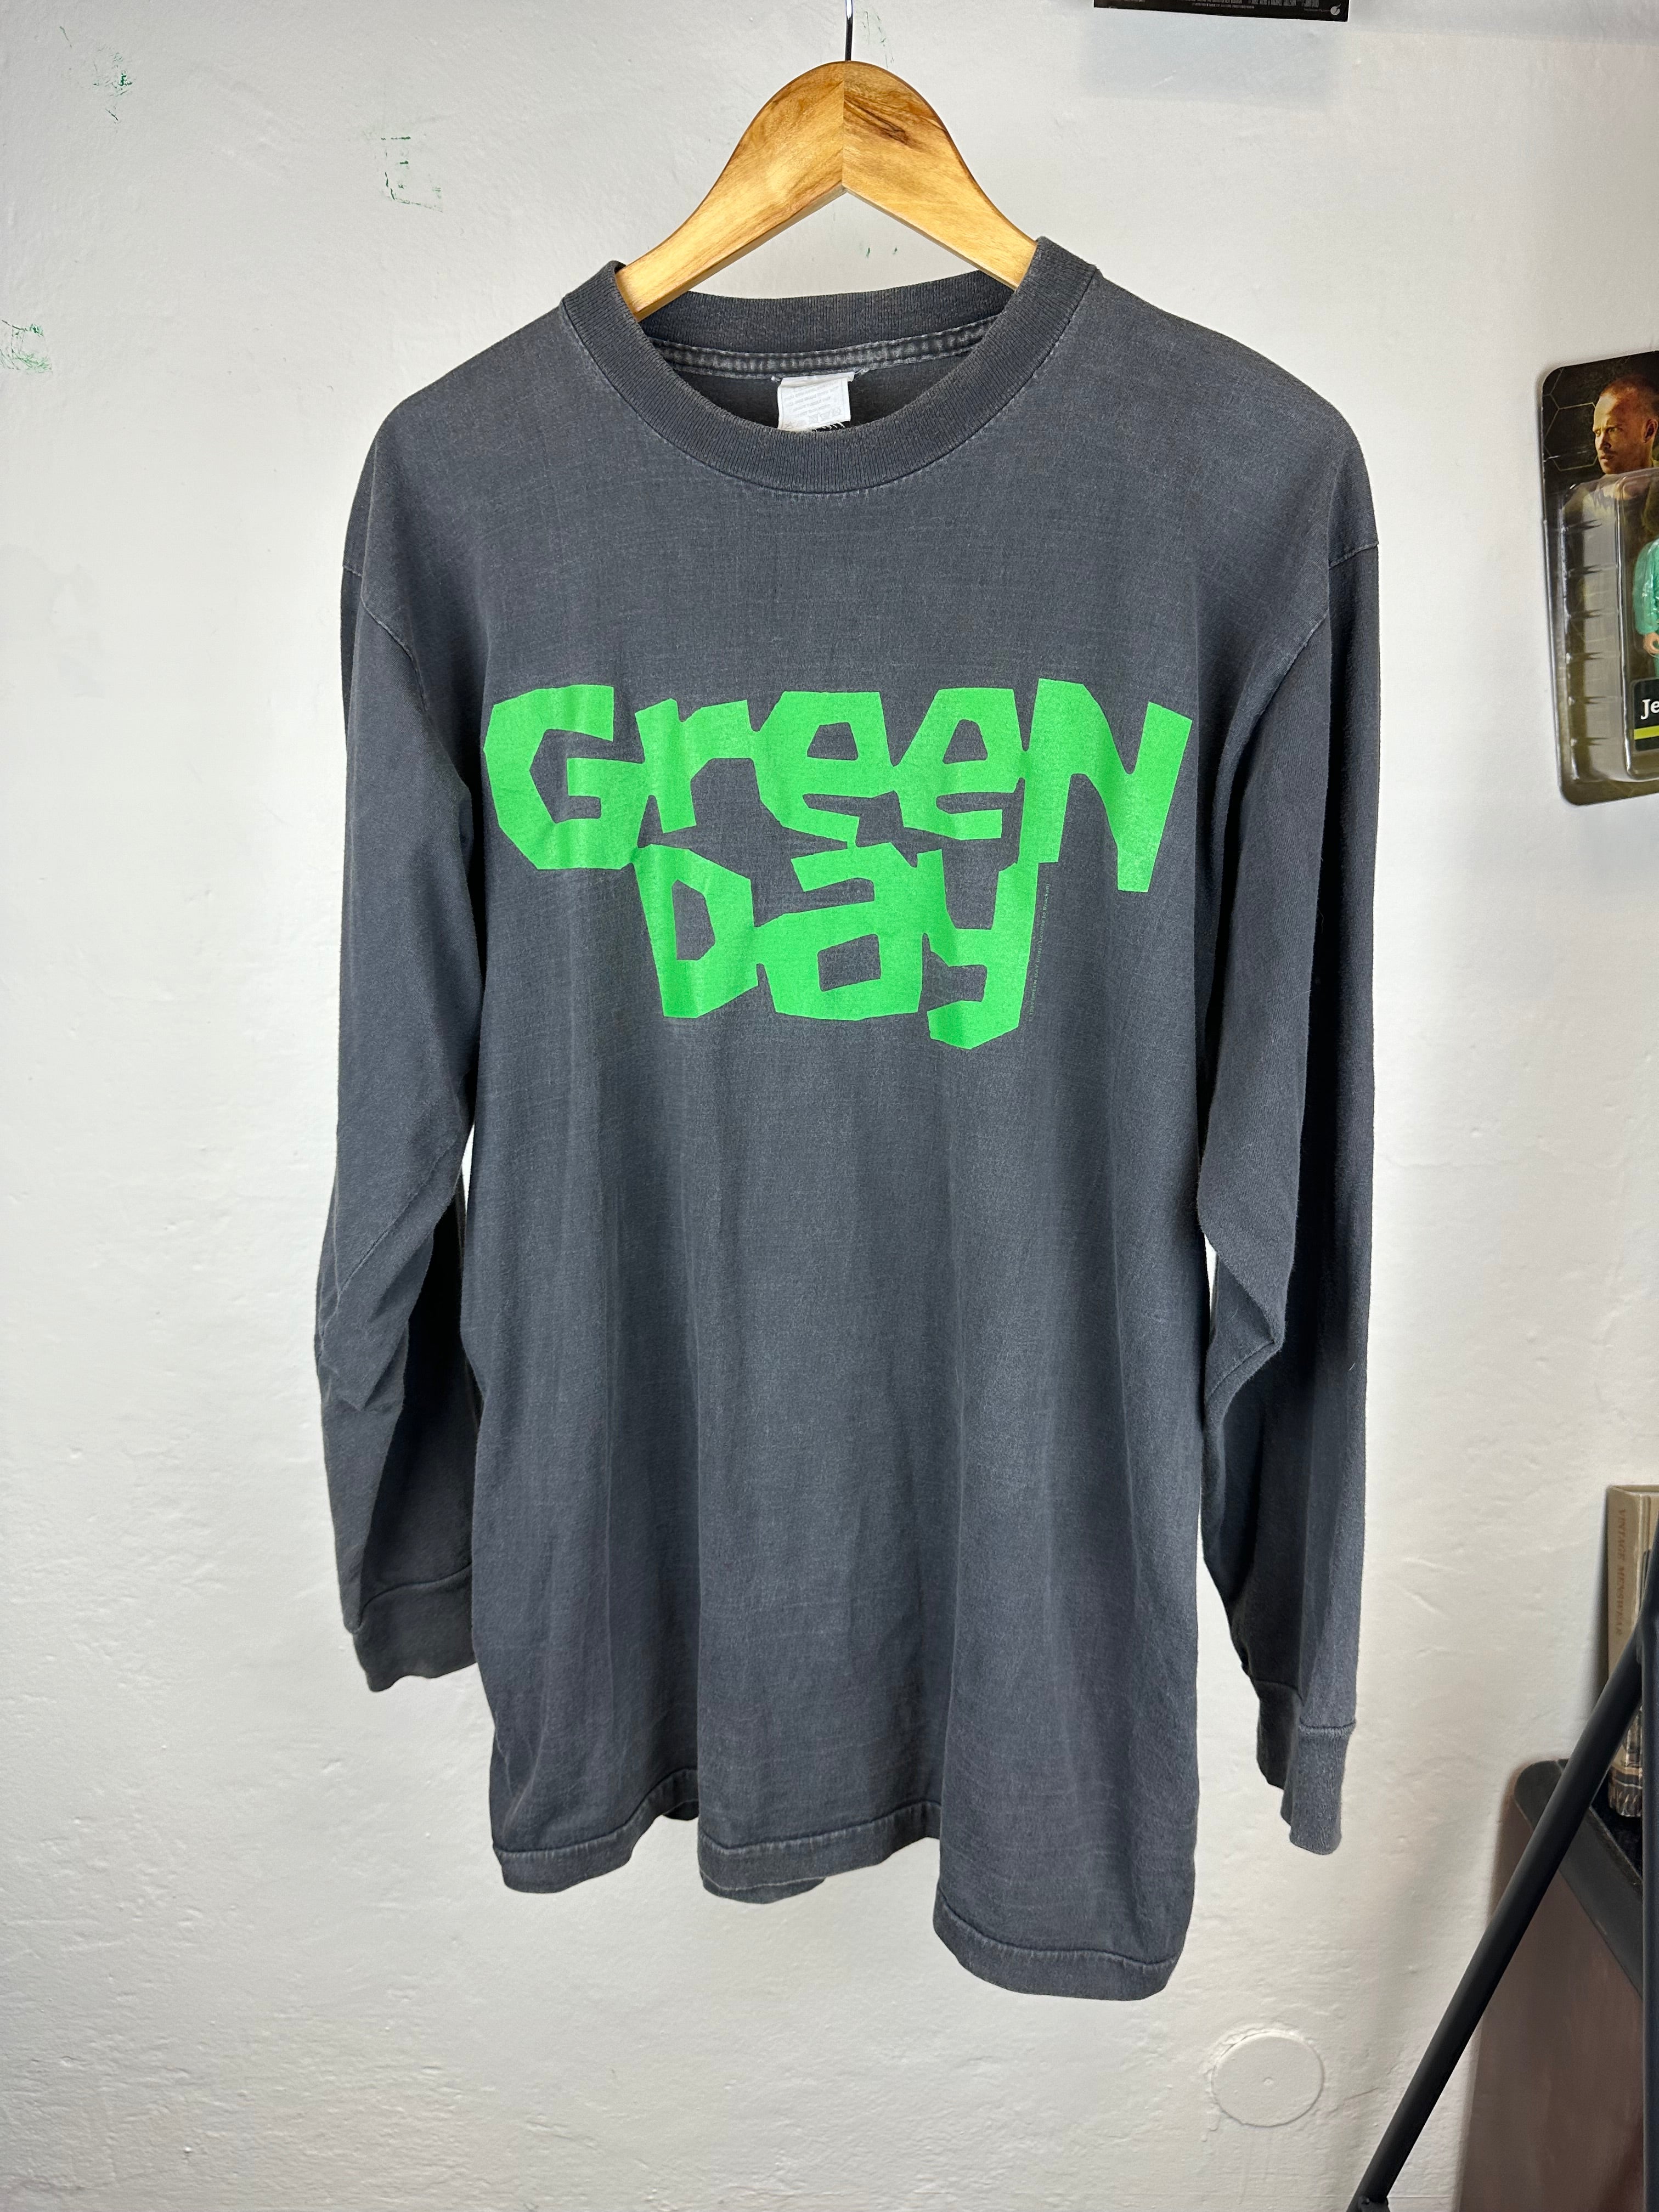 Vintage Green Day 1994 t-shirt - size L